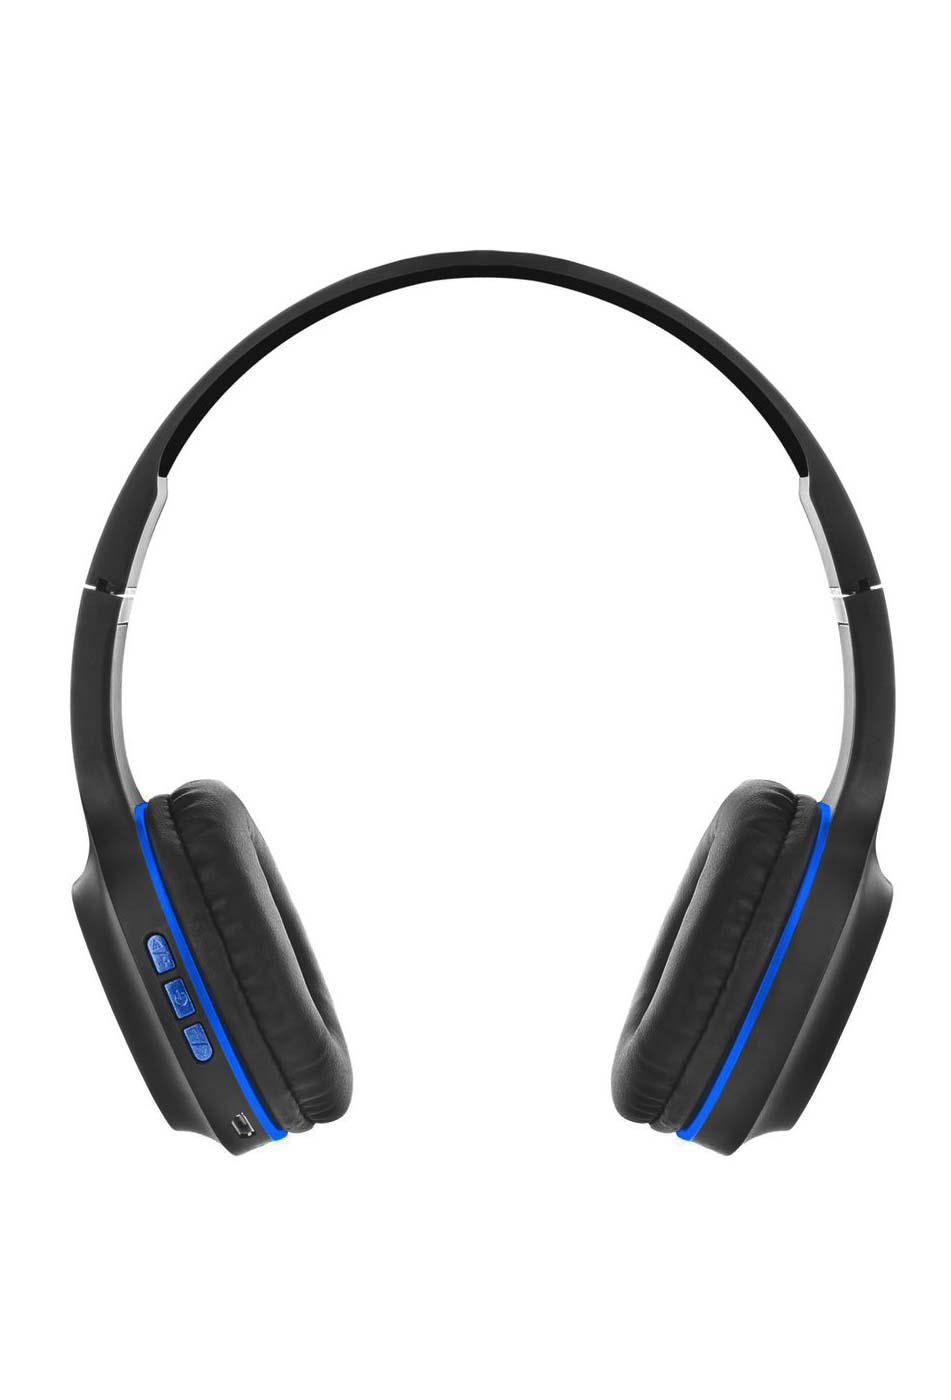 Sentry Kid-Safe Wireless Headphones with Mic - Blue & Black; image 2 of 2